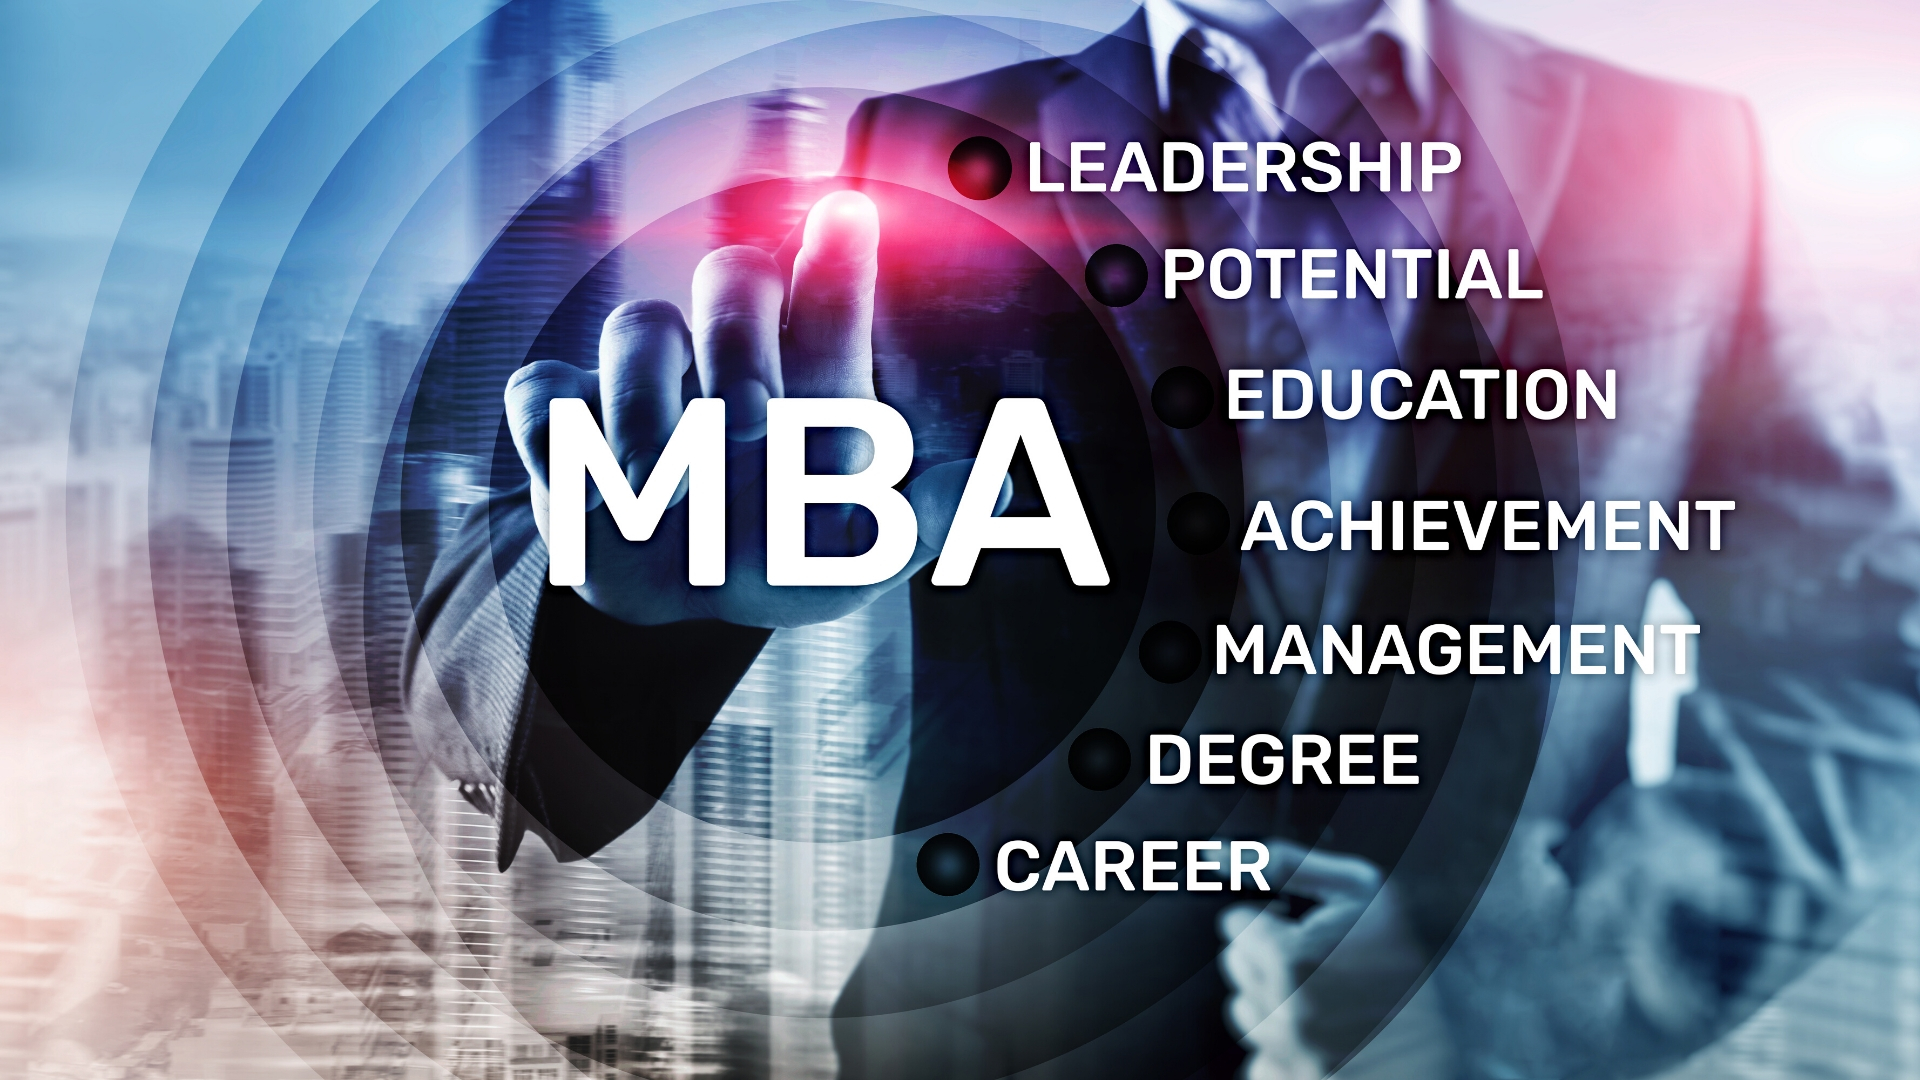 Chapter Wise MBA Books Notes Study Material PDF Download